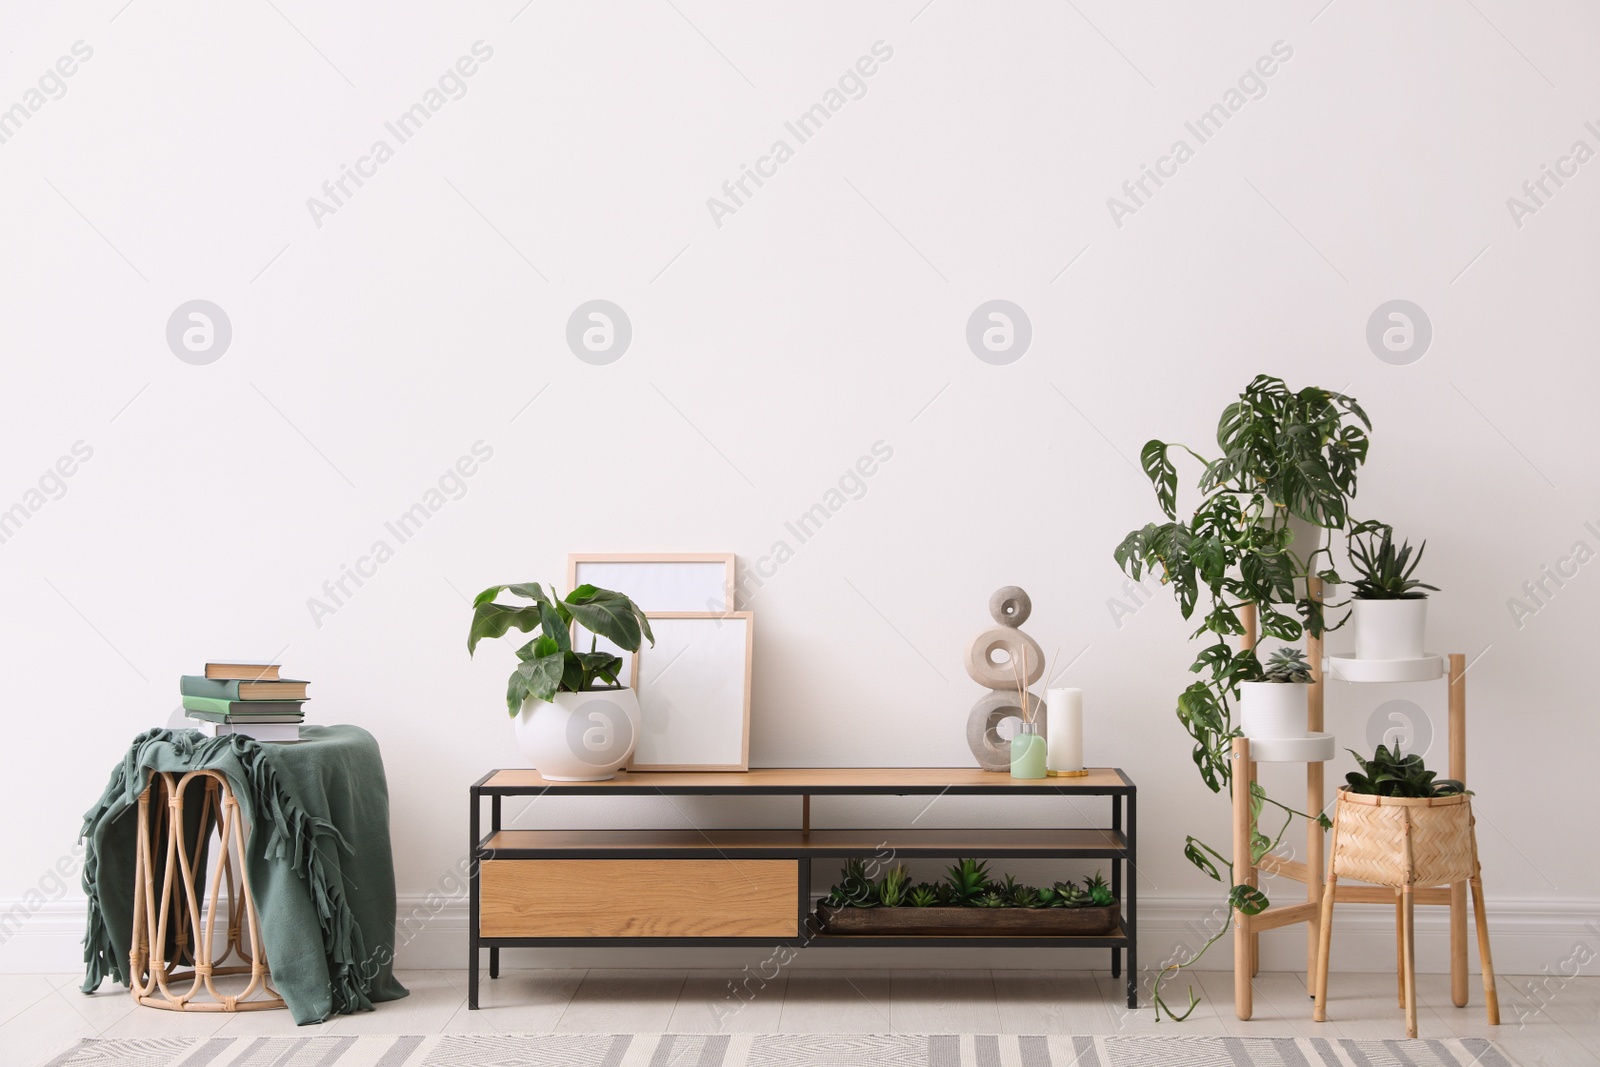 Photo of Elegant room interior with wooden cabinet and beautiful houseplants near light wall